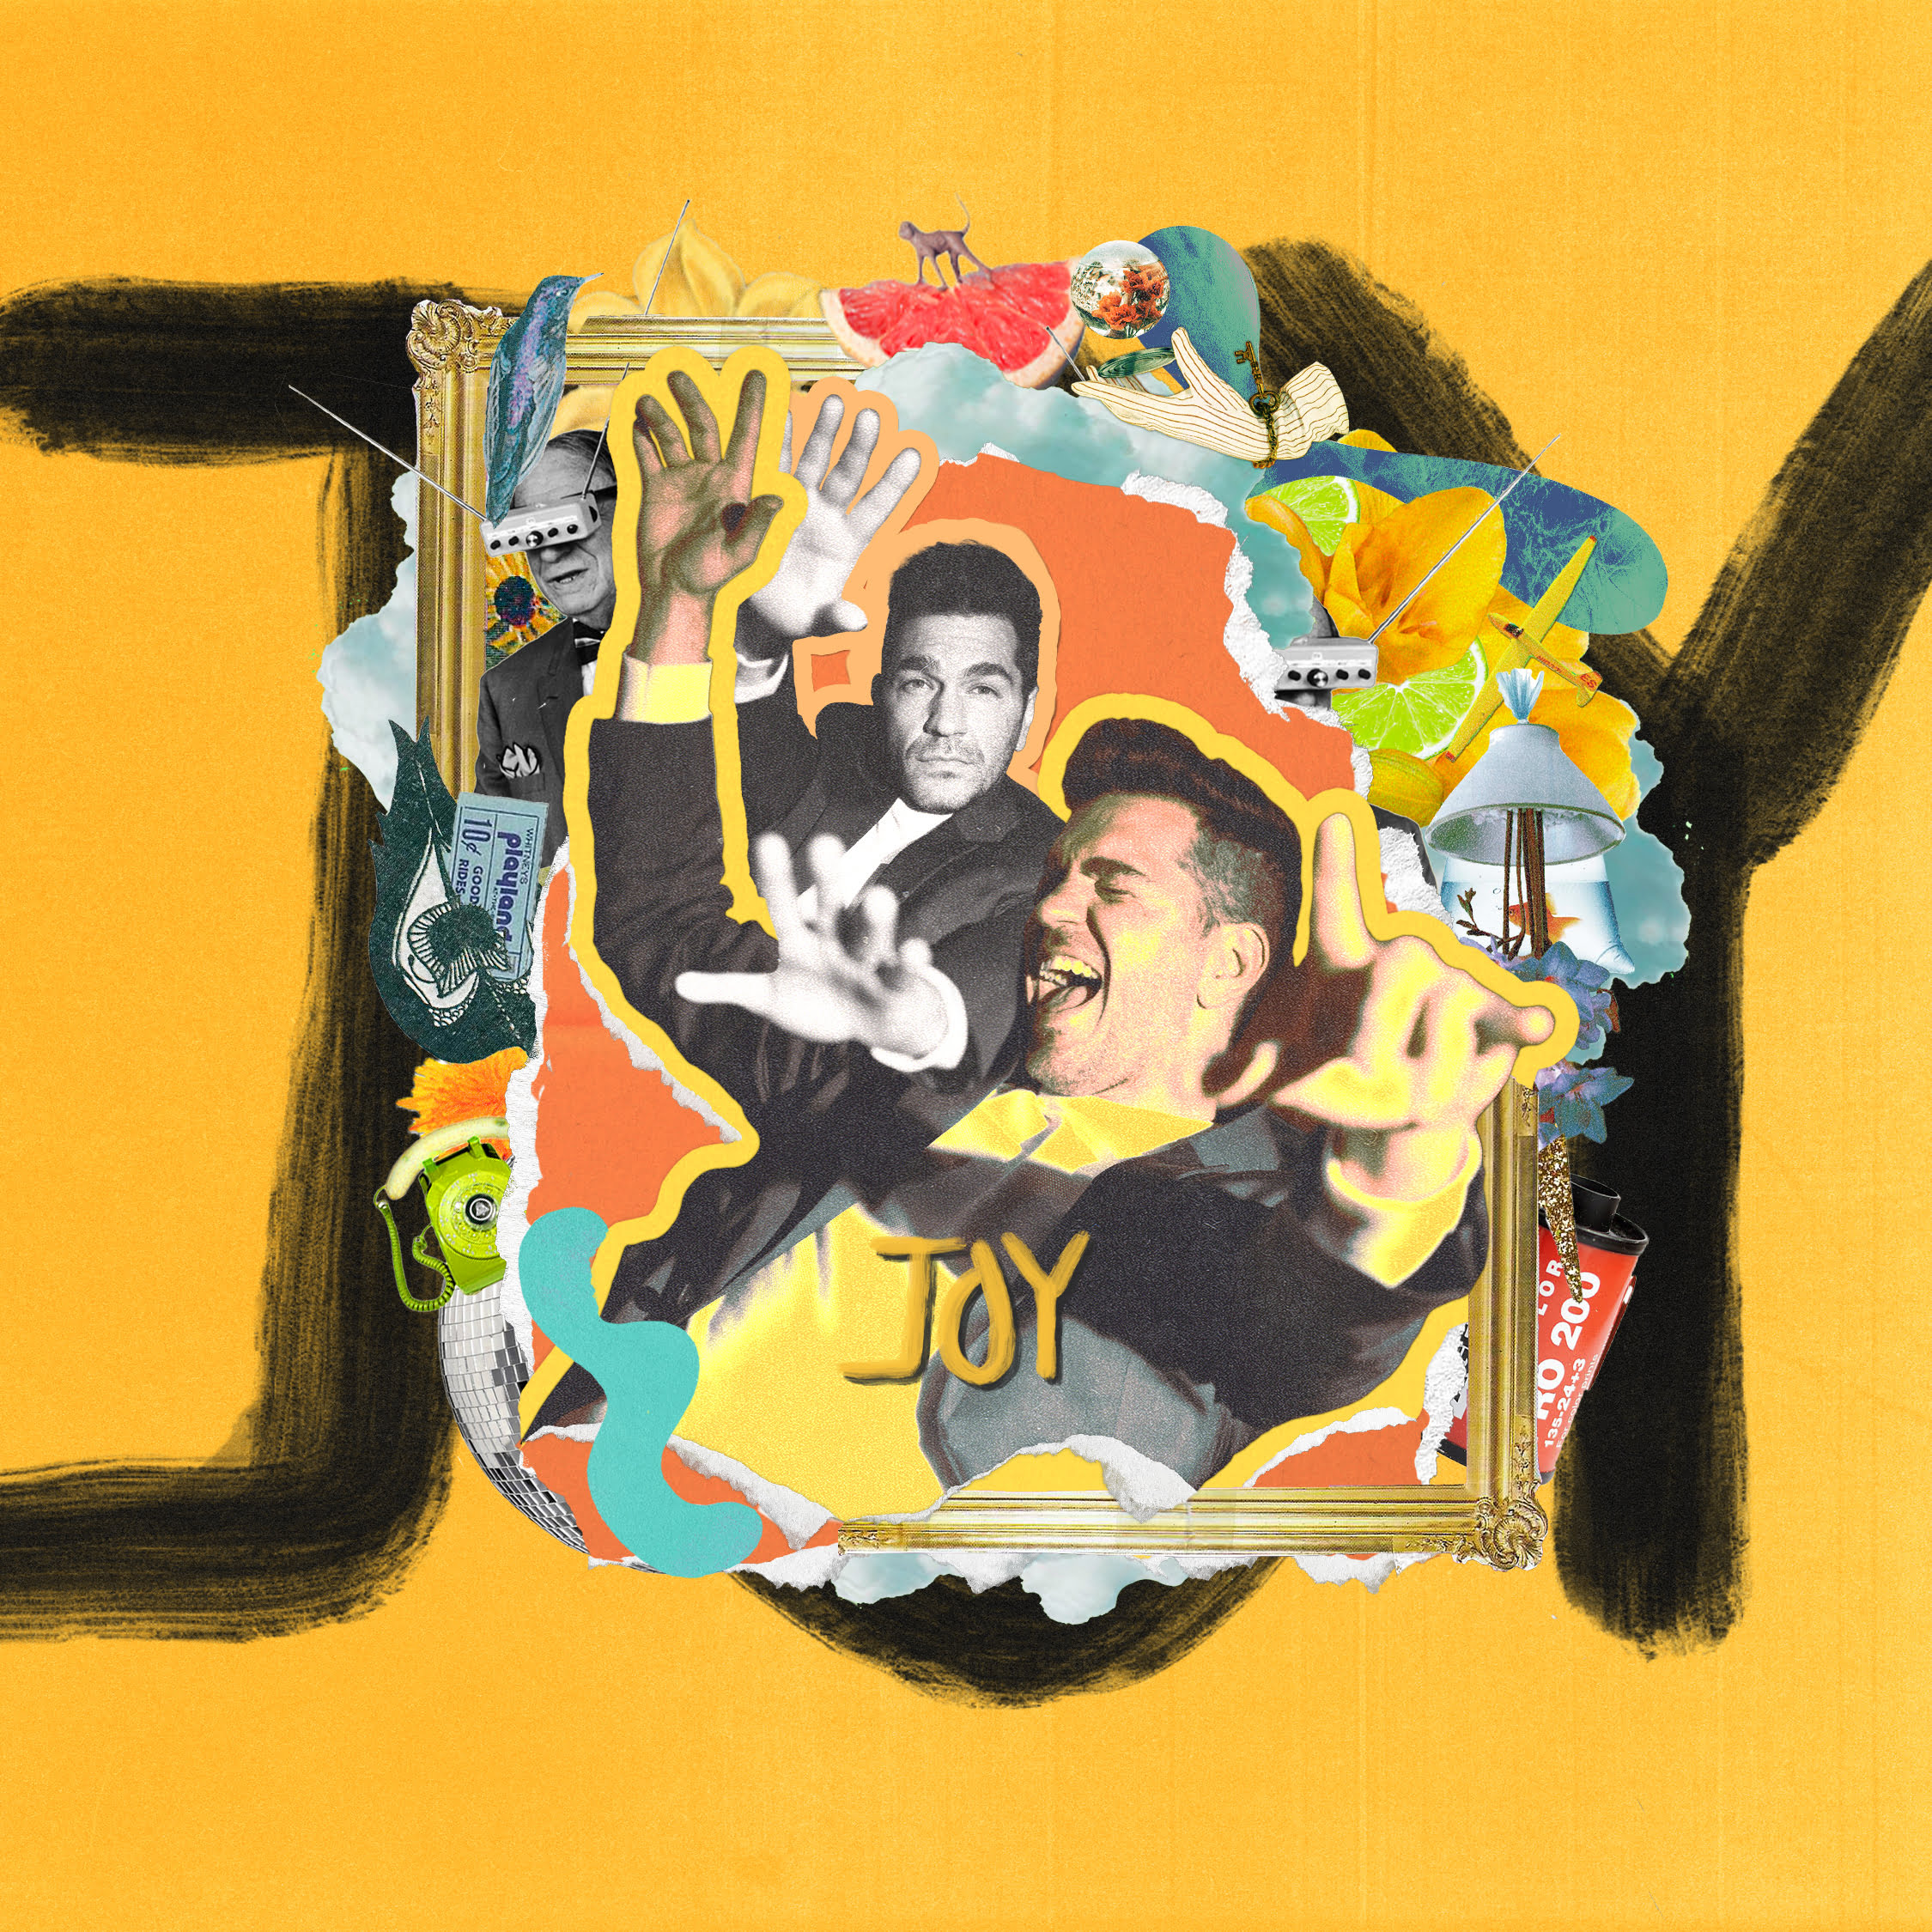 Andy Grammer's Joy Cover Image via The Oriel Company for use by 360 Magazine